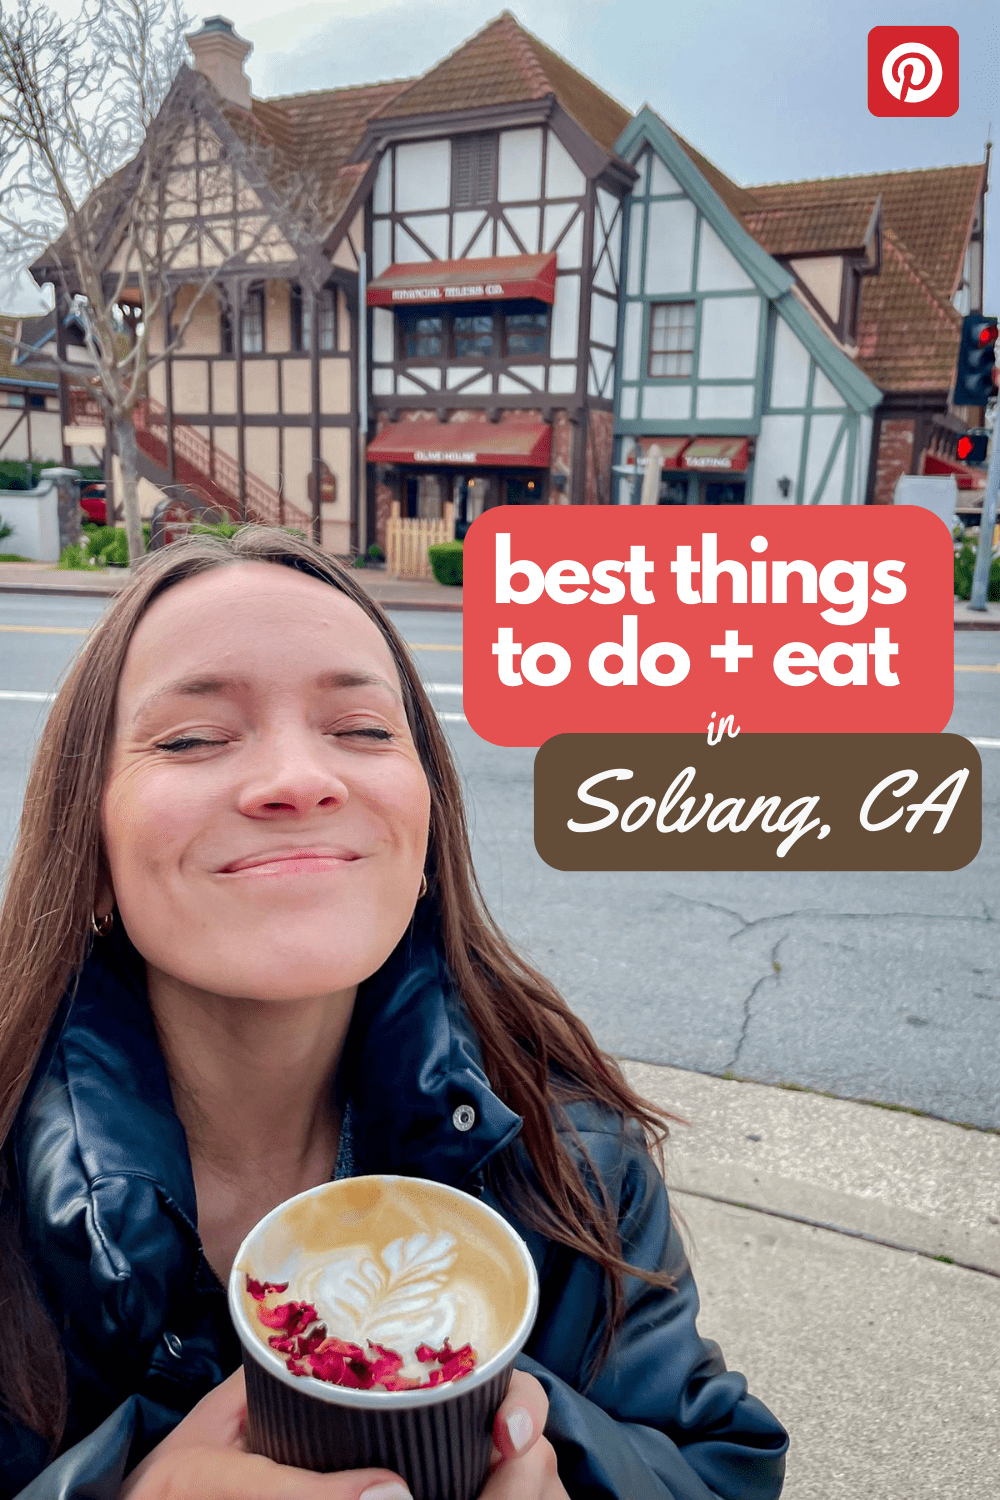 Woman smiling and holding a latte with Solvang buildings behind her. Text reads: "Best things to do and eat in Solvang, CA"